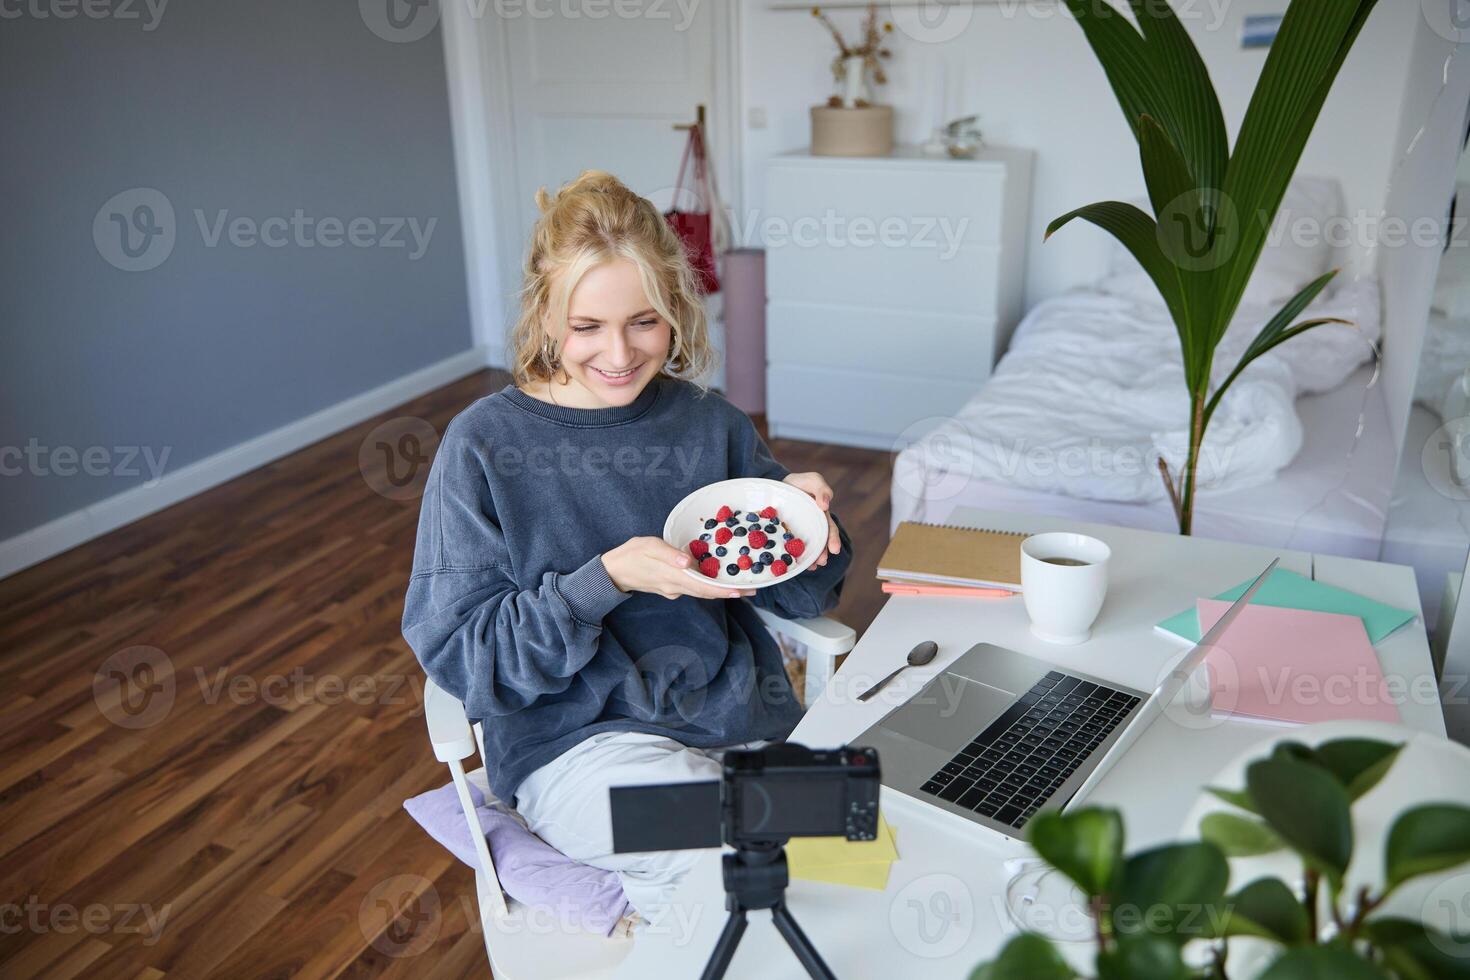 Portrait of cute young girl vlogger, showing her breakfast on camera, recording vlog in her bedroom, holding dessert, eating photo